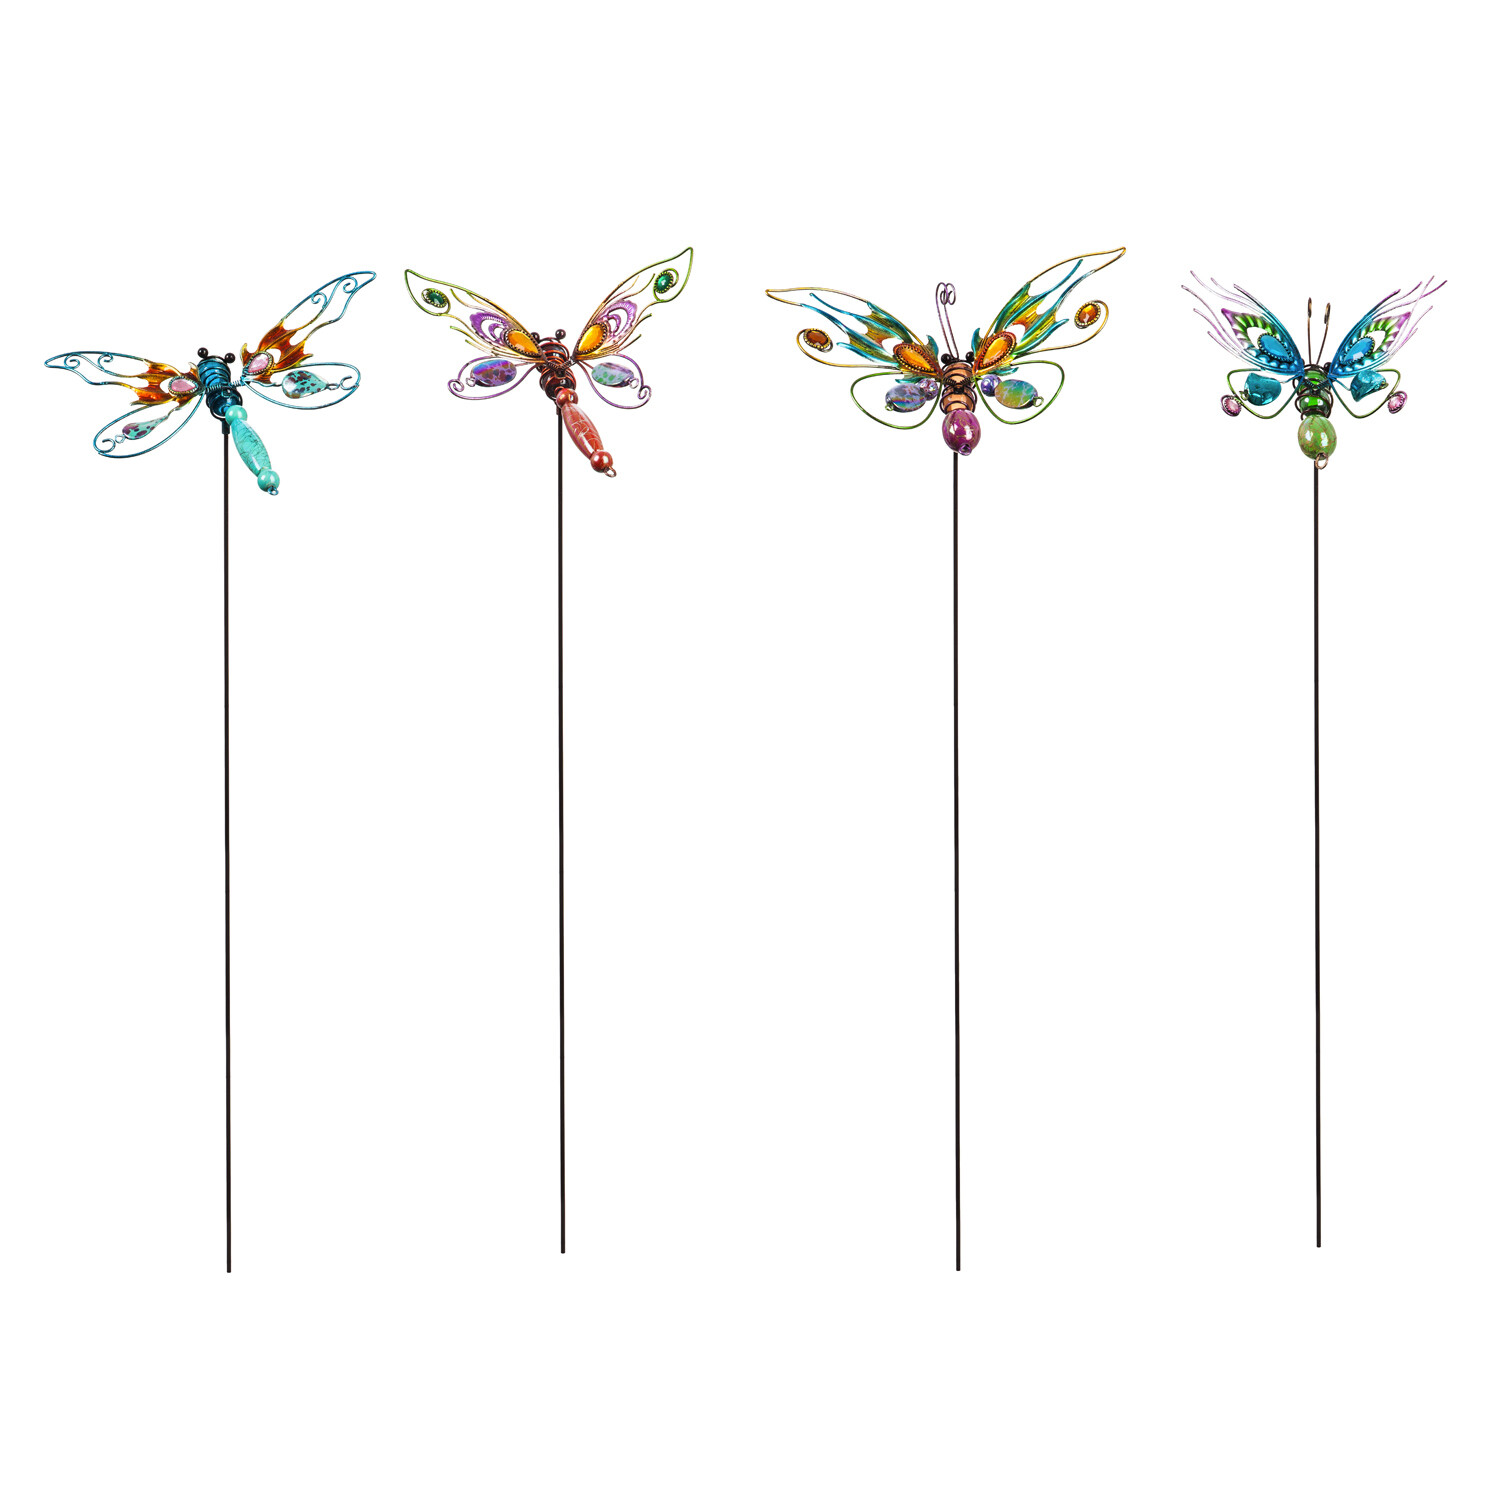 Decorative Dragonfly and Butterfly Garden Stake